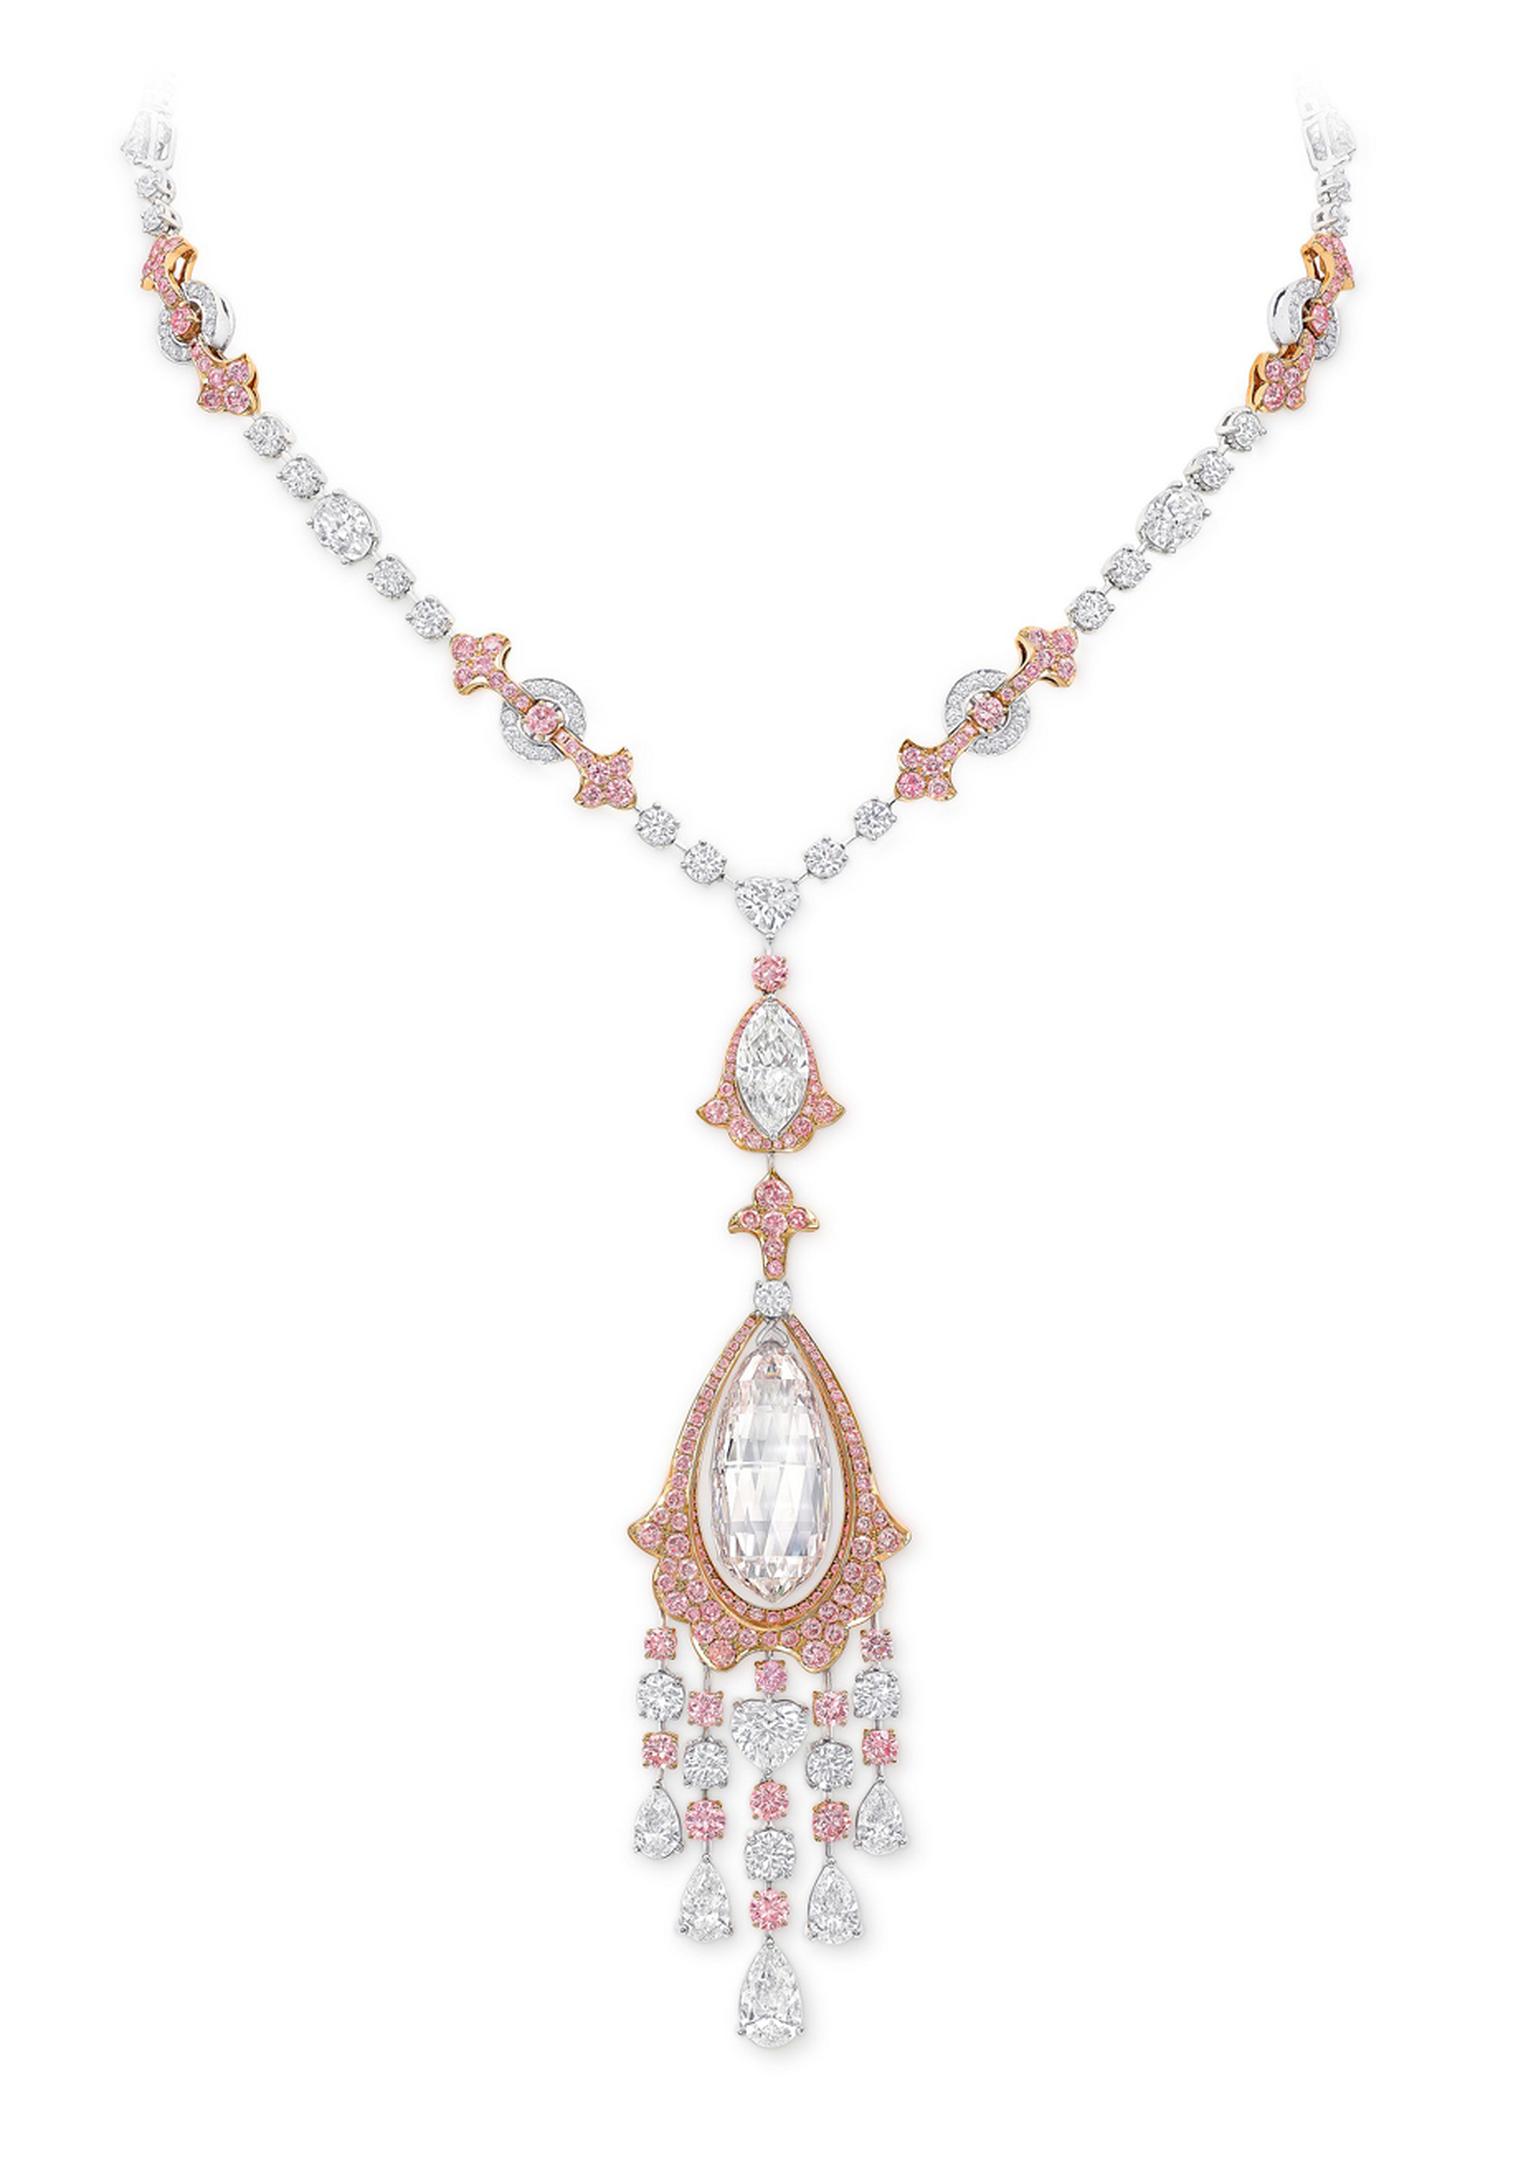 Graff diamond necklace featuring 388 pink and white diamonds and a 30.94ct very light pink briolette diamond that has been weightlessly suspended within a rose gold frame and accentuated with a cascade of white and pink diamonds.